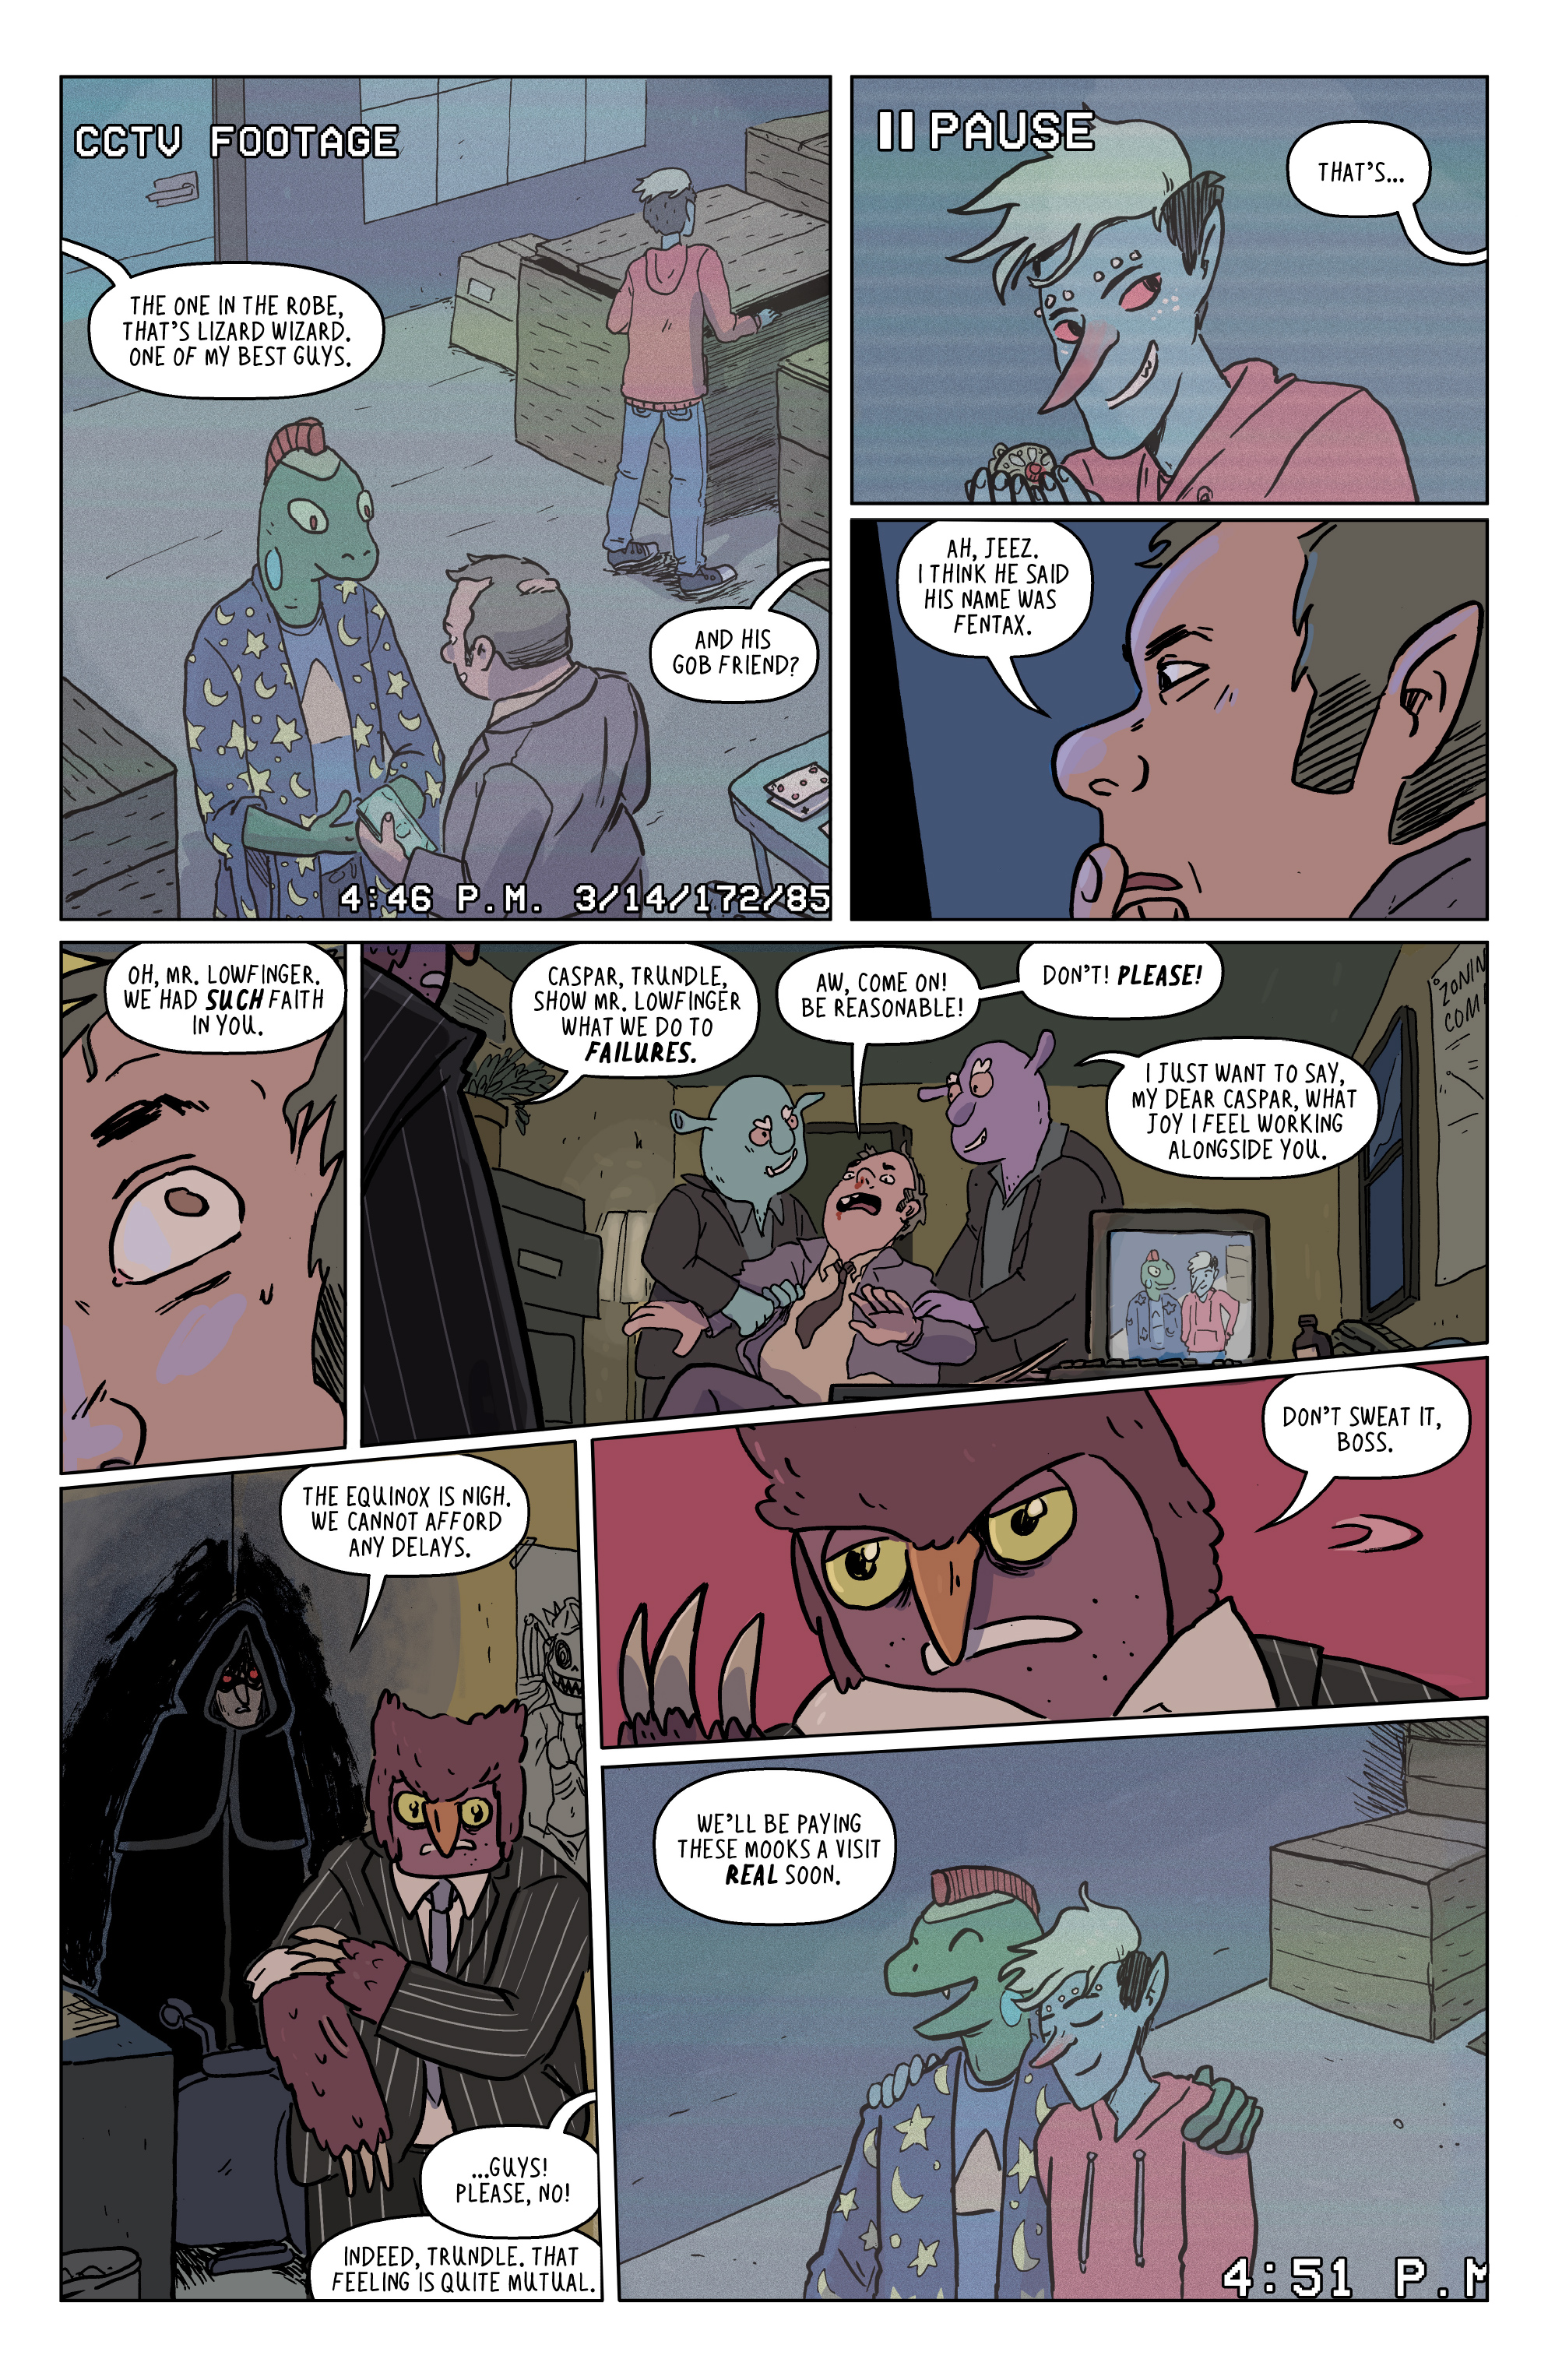 Modern Fantasy (2018-): Chapter 1 - Page 4